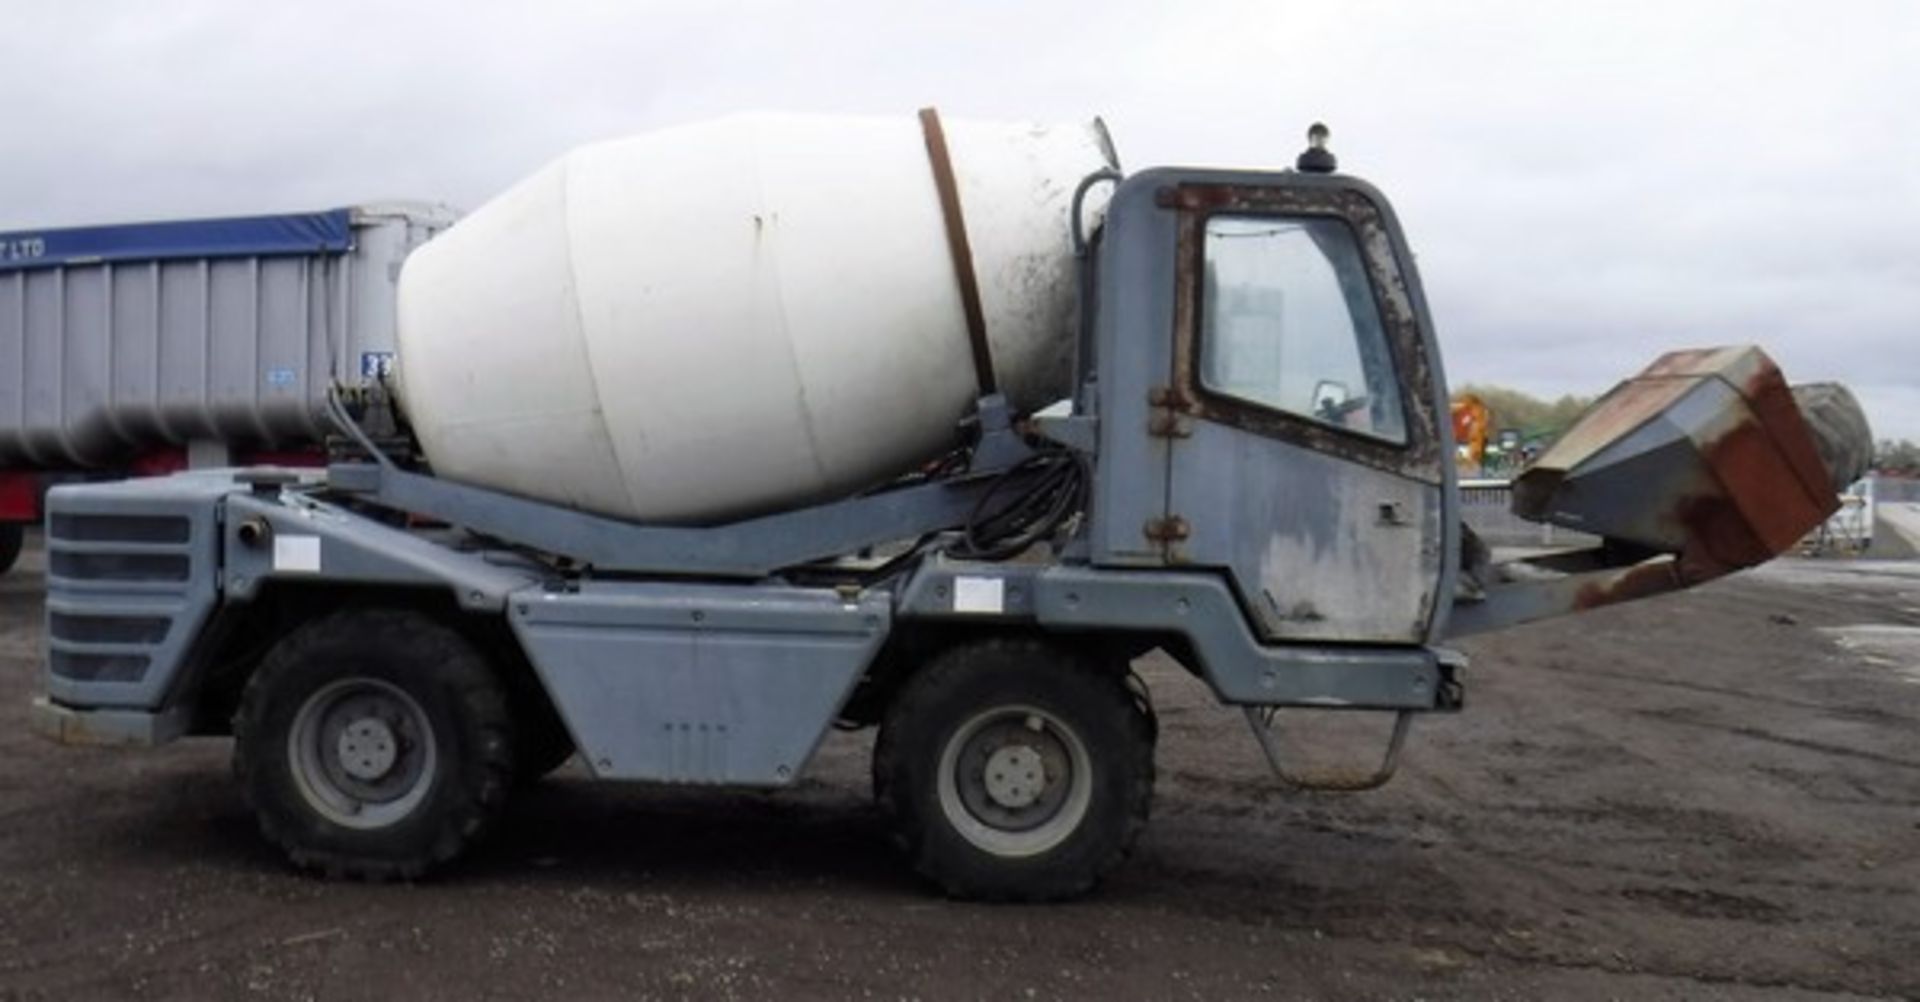 2003 HYDRO MIX 35G rough terrain concrete mixer (3.5 cu.m) 4 x 4 wheel driven with a free standing c - Image 4 of 18